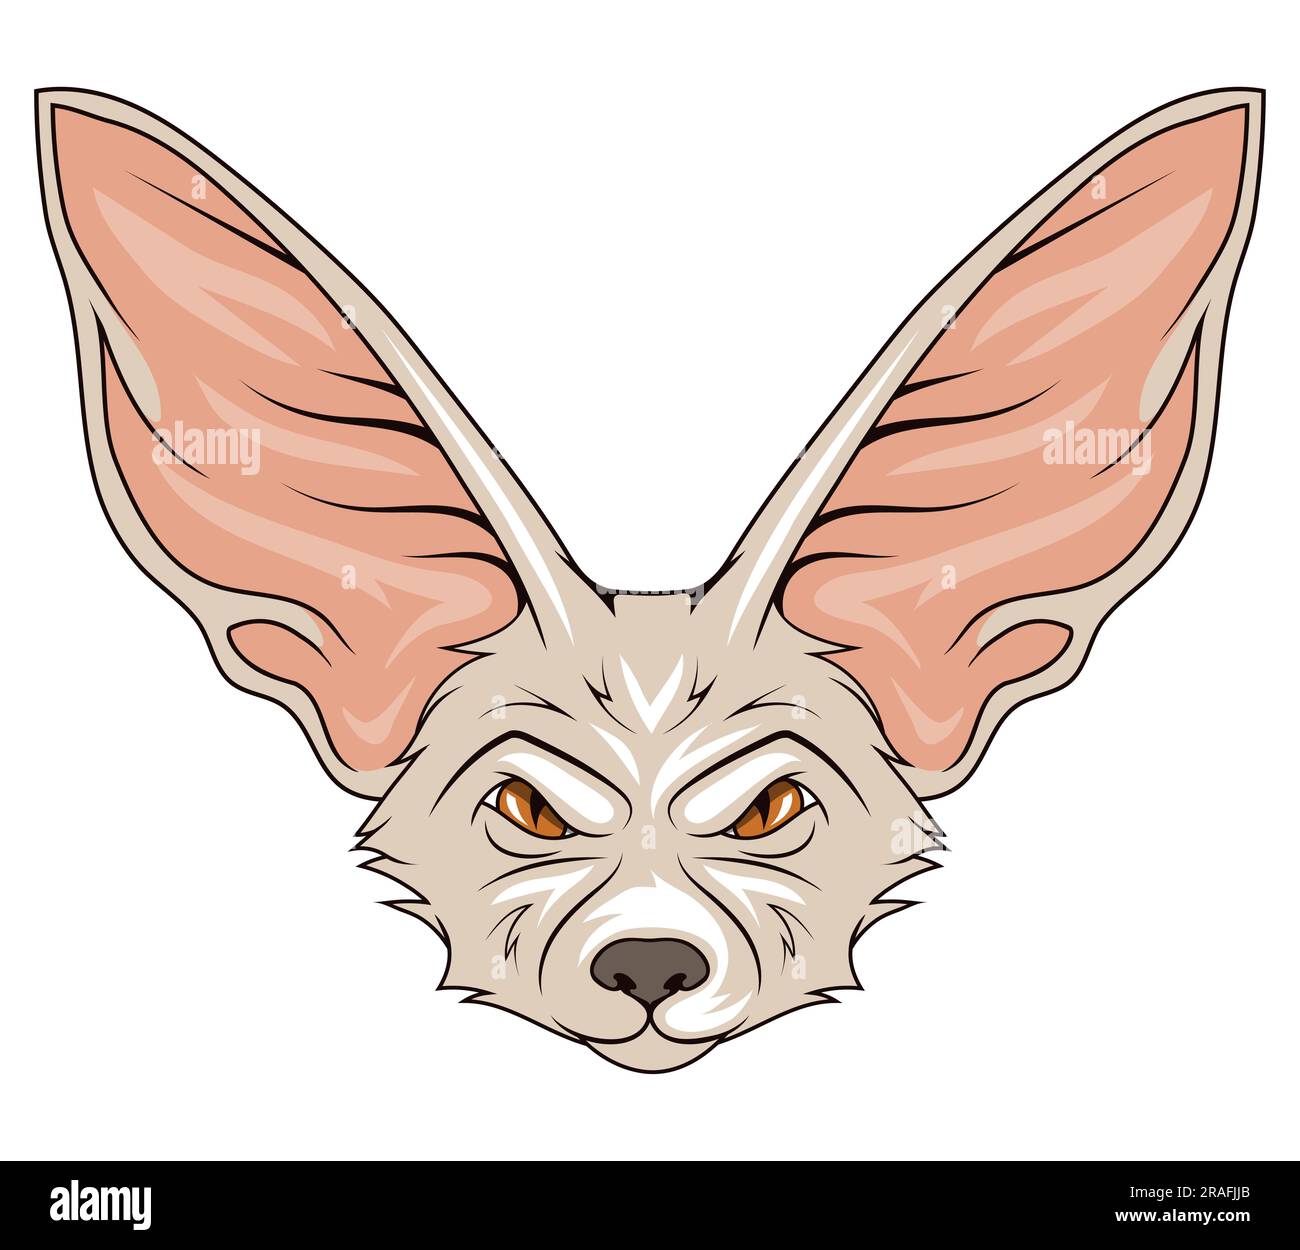 Fennec fox. Vector illustration of a cute animal. A miniature fox that lives in the deserts of north africa. Wild animals. Stock Vector